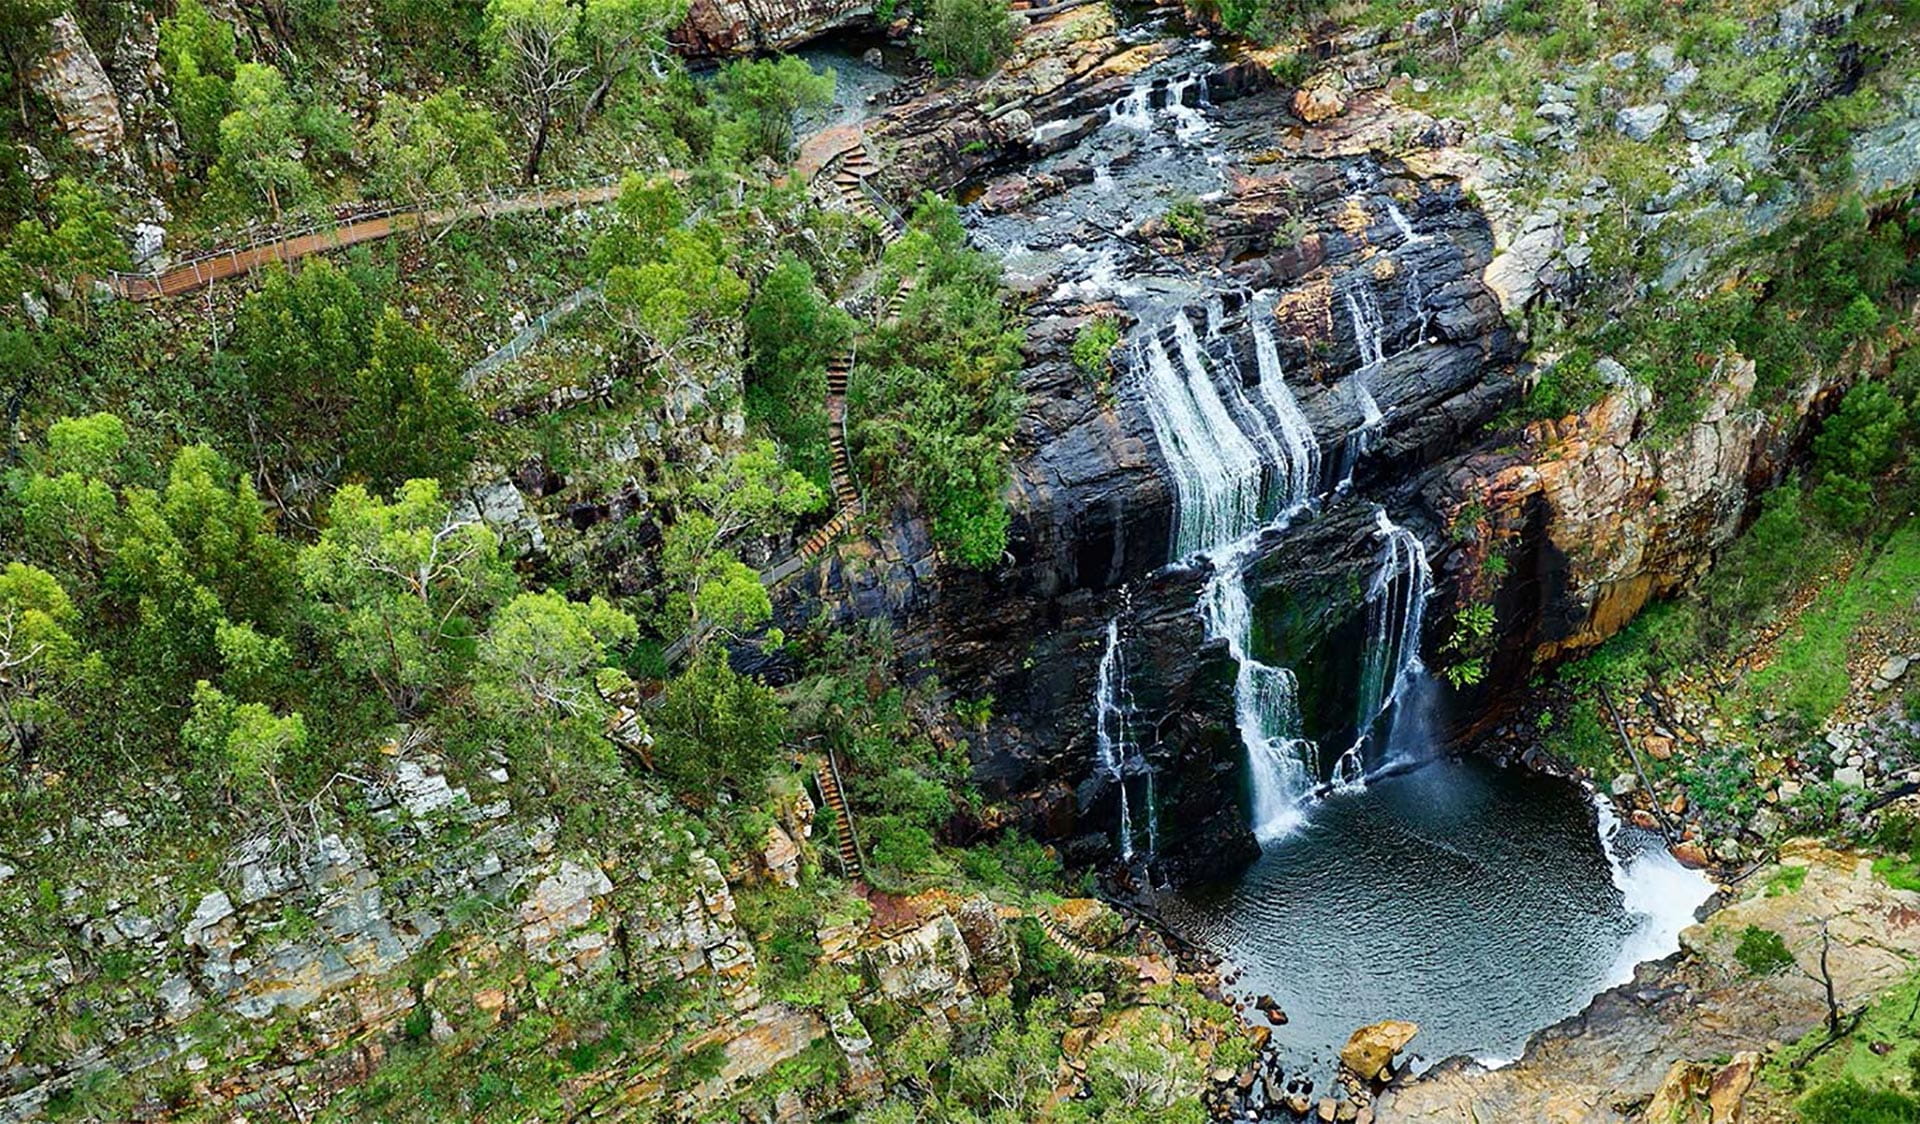 https://www.parks.vic.gov.au/-/media/project/pv/main/parks/images/places-to-see/grampians-national-park/1-waterfalls-grampians-national-park-1920x1124.jpg?h=450&thn=0&w=764&bc=FFFFFF&hash=F7FF4D7A1738575462BEE1A511B845515FD8F8DB